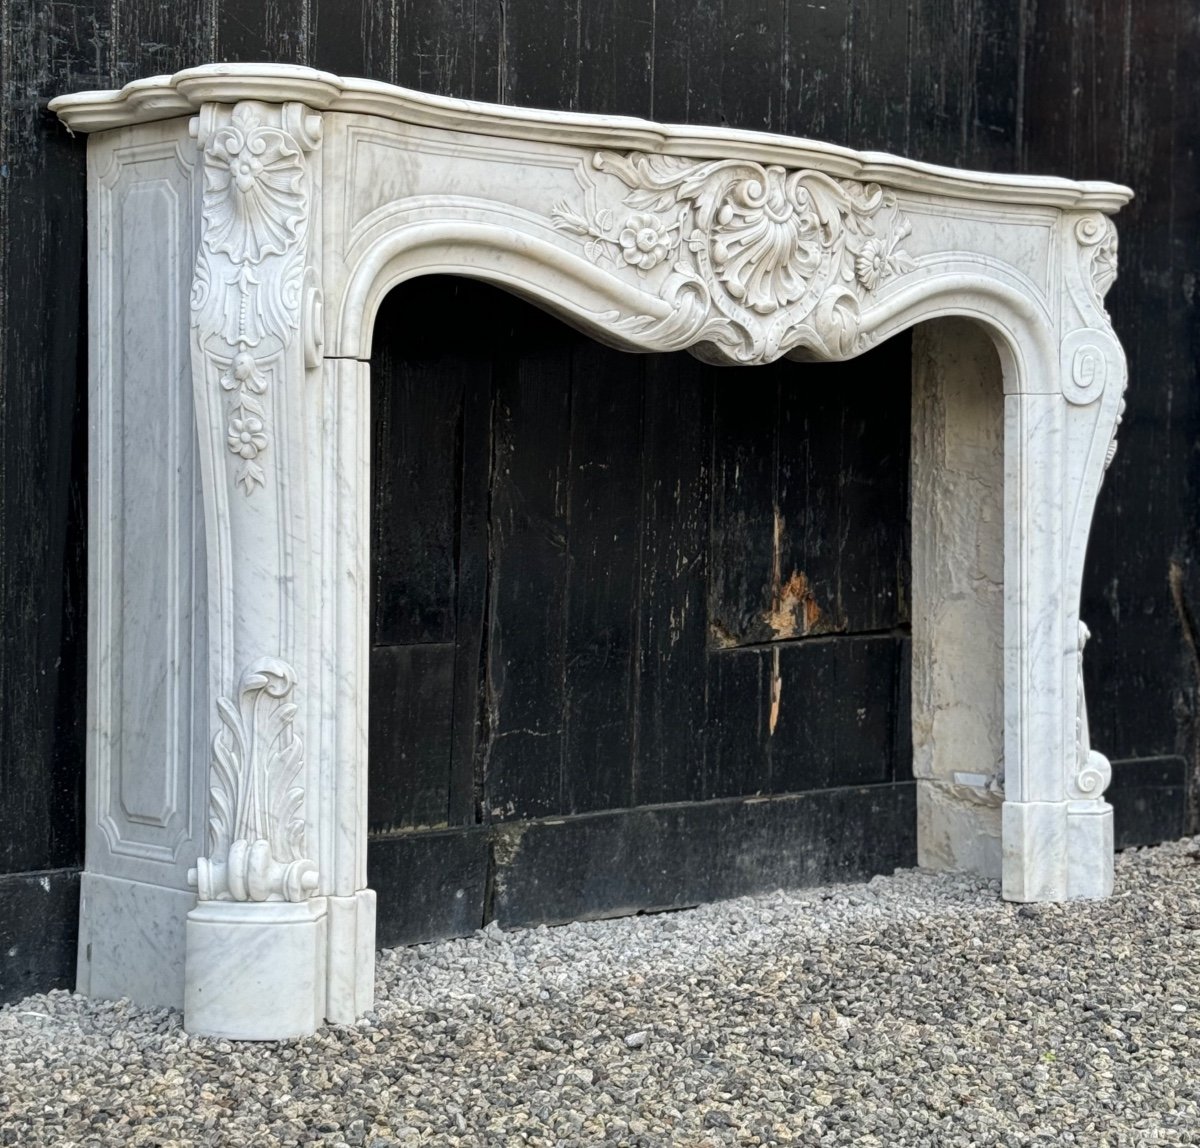 Remarkable Louis XV Style Fireplace In White Carrara Marble Circa 1880